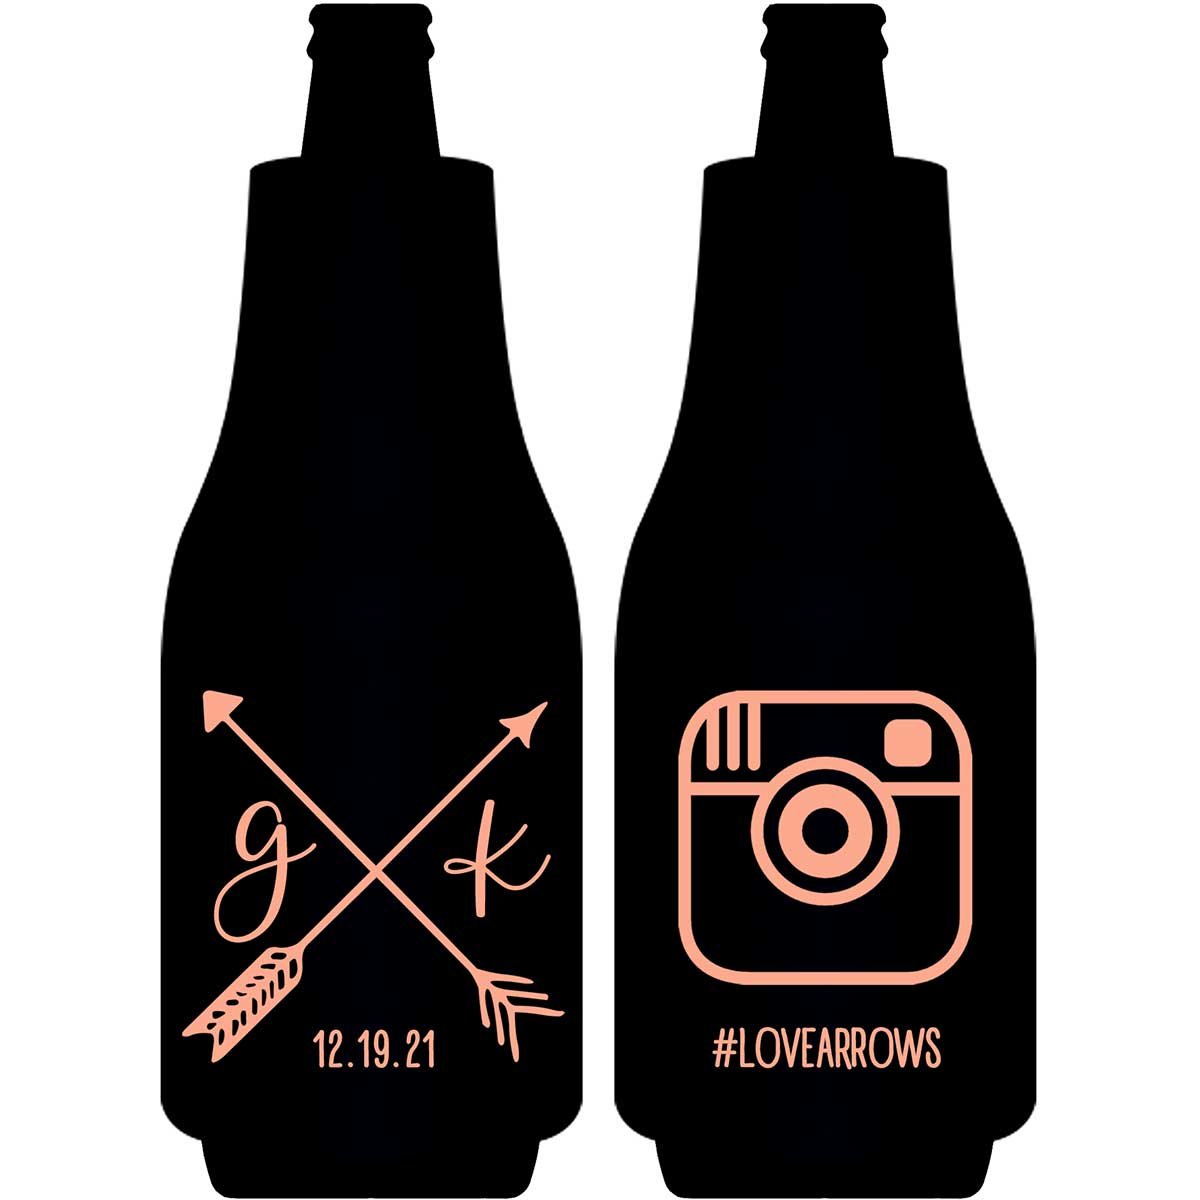 Love Arrows 2C Instagram Hashtag Foldable Bottle Sleeve Koozies Wedding Gifts for Guests